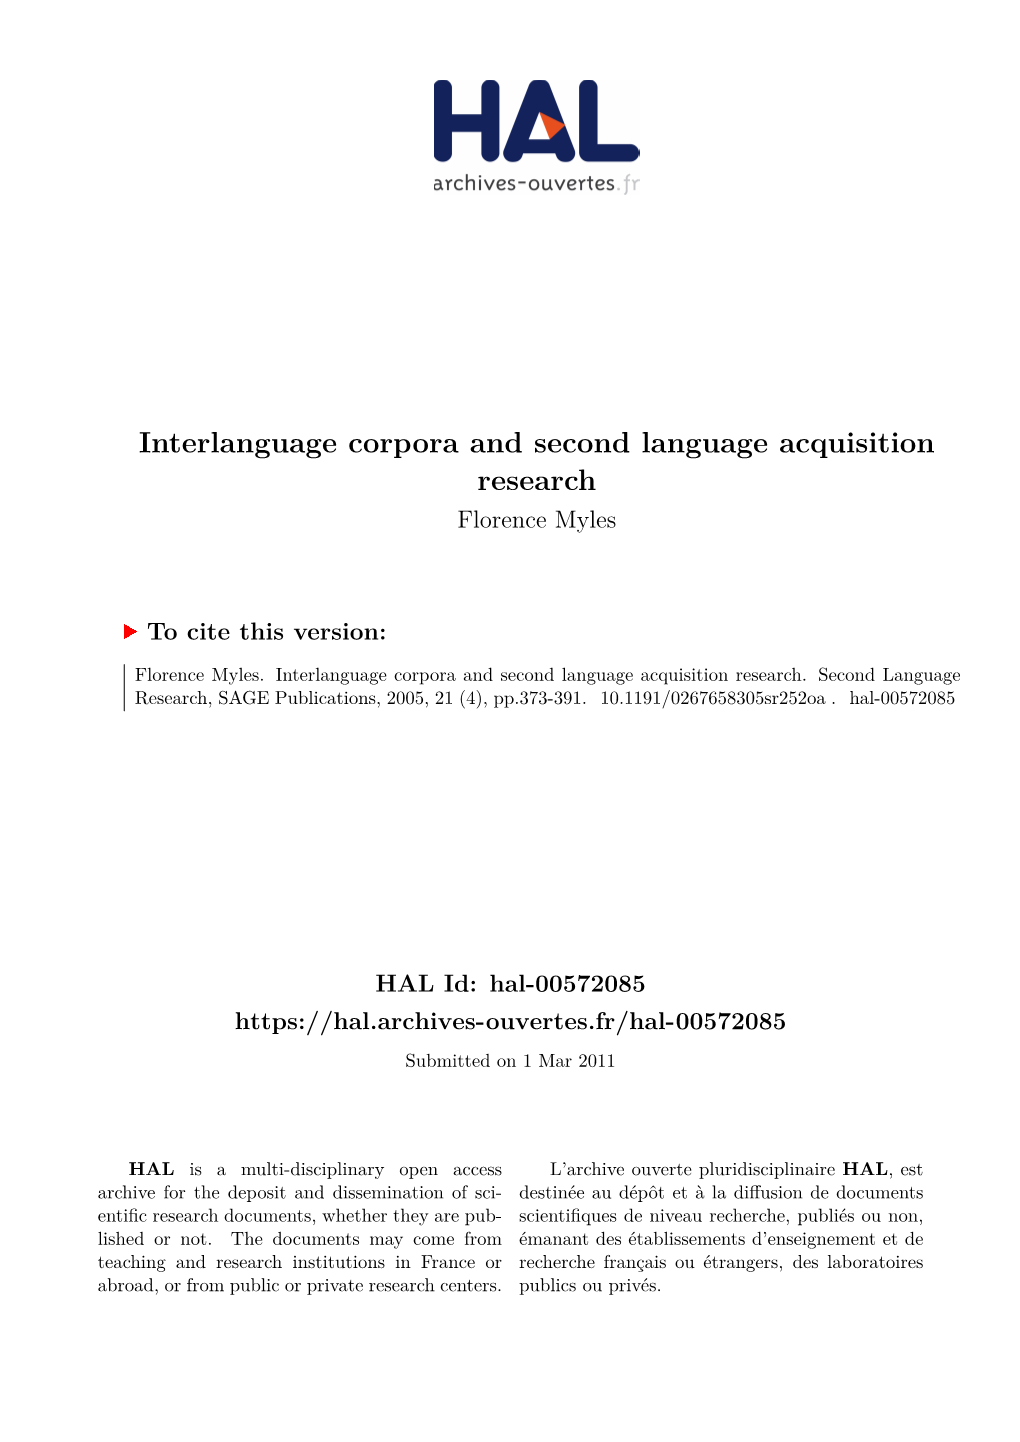 Interlanguage Corpora and Second Language Acquisition Research Florence Myles